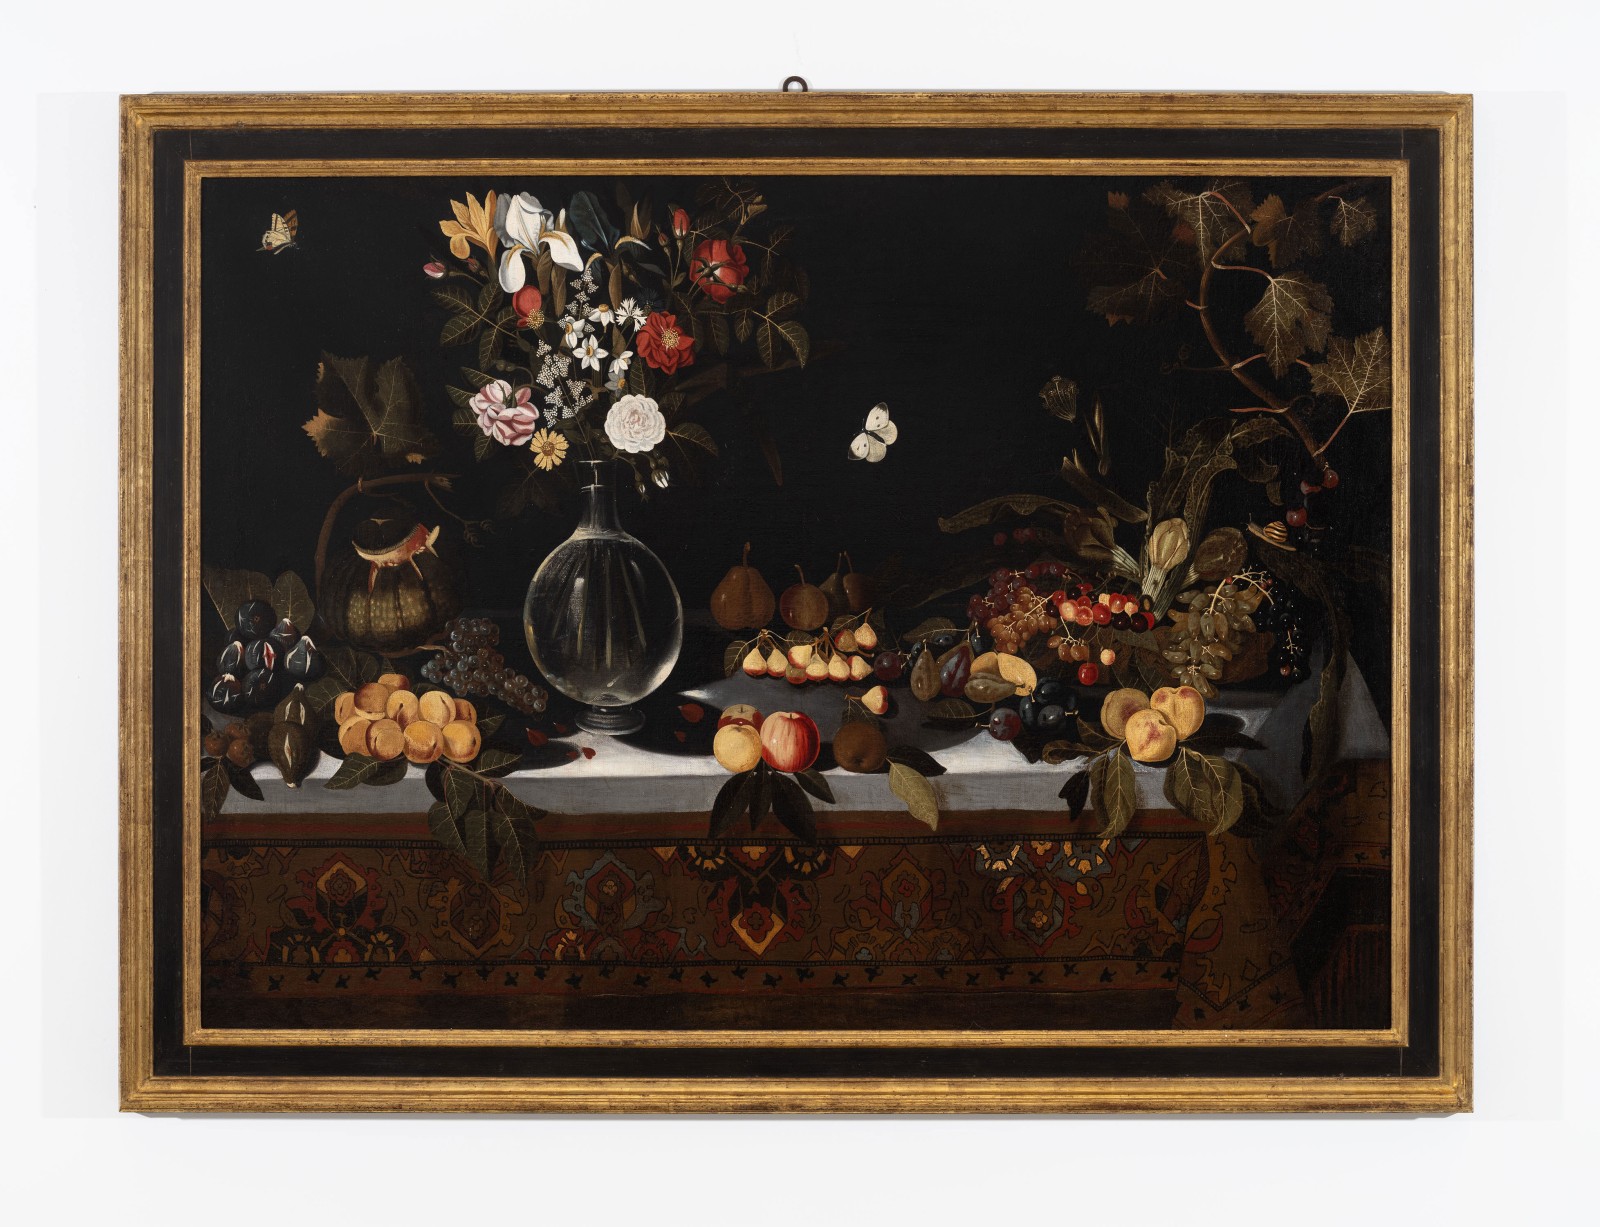 Master of Hartford (Early 17th Century, Rome), Still life with fruit, vegetables and a vase with flowers on a table